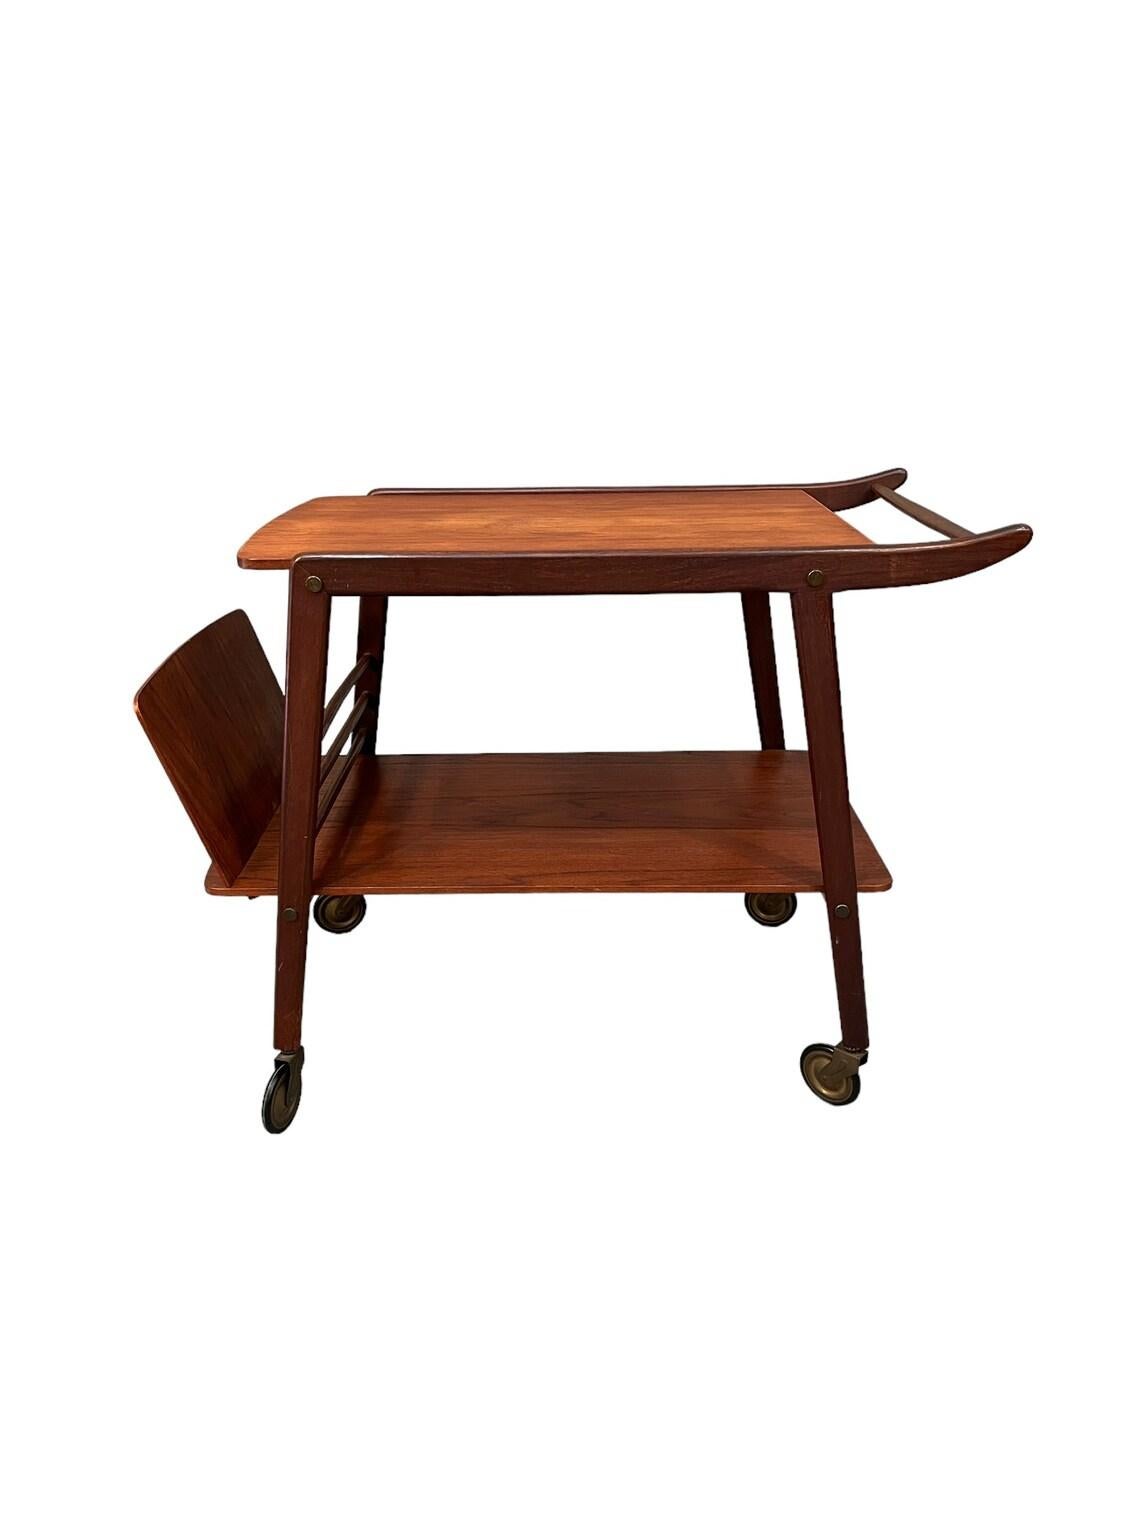 This Mid-Century Danish teak bar cart with magazine holder, circa 1960, is a beautiful example of Scandinavian design. Crafted by Hans Wegner, it features a medium wood tone, measuring 26.25 inches tall, and 20.5 inches wide, with a depth of 29.5